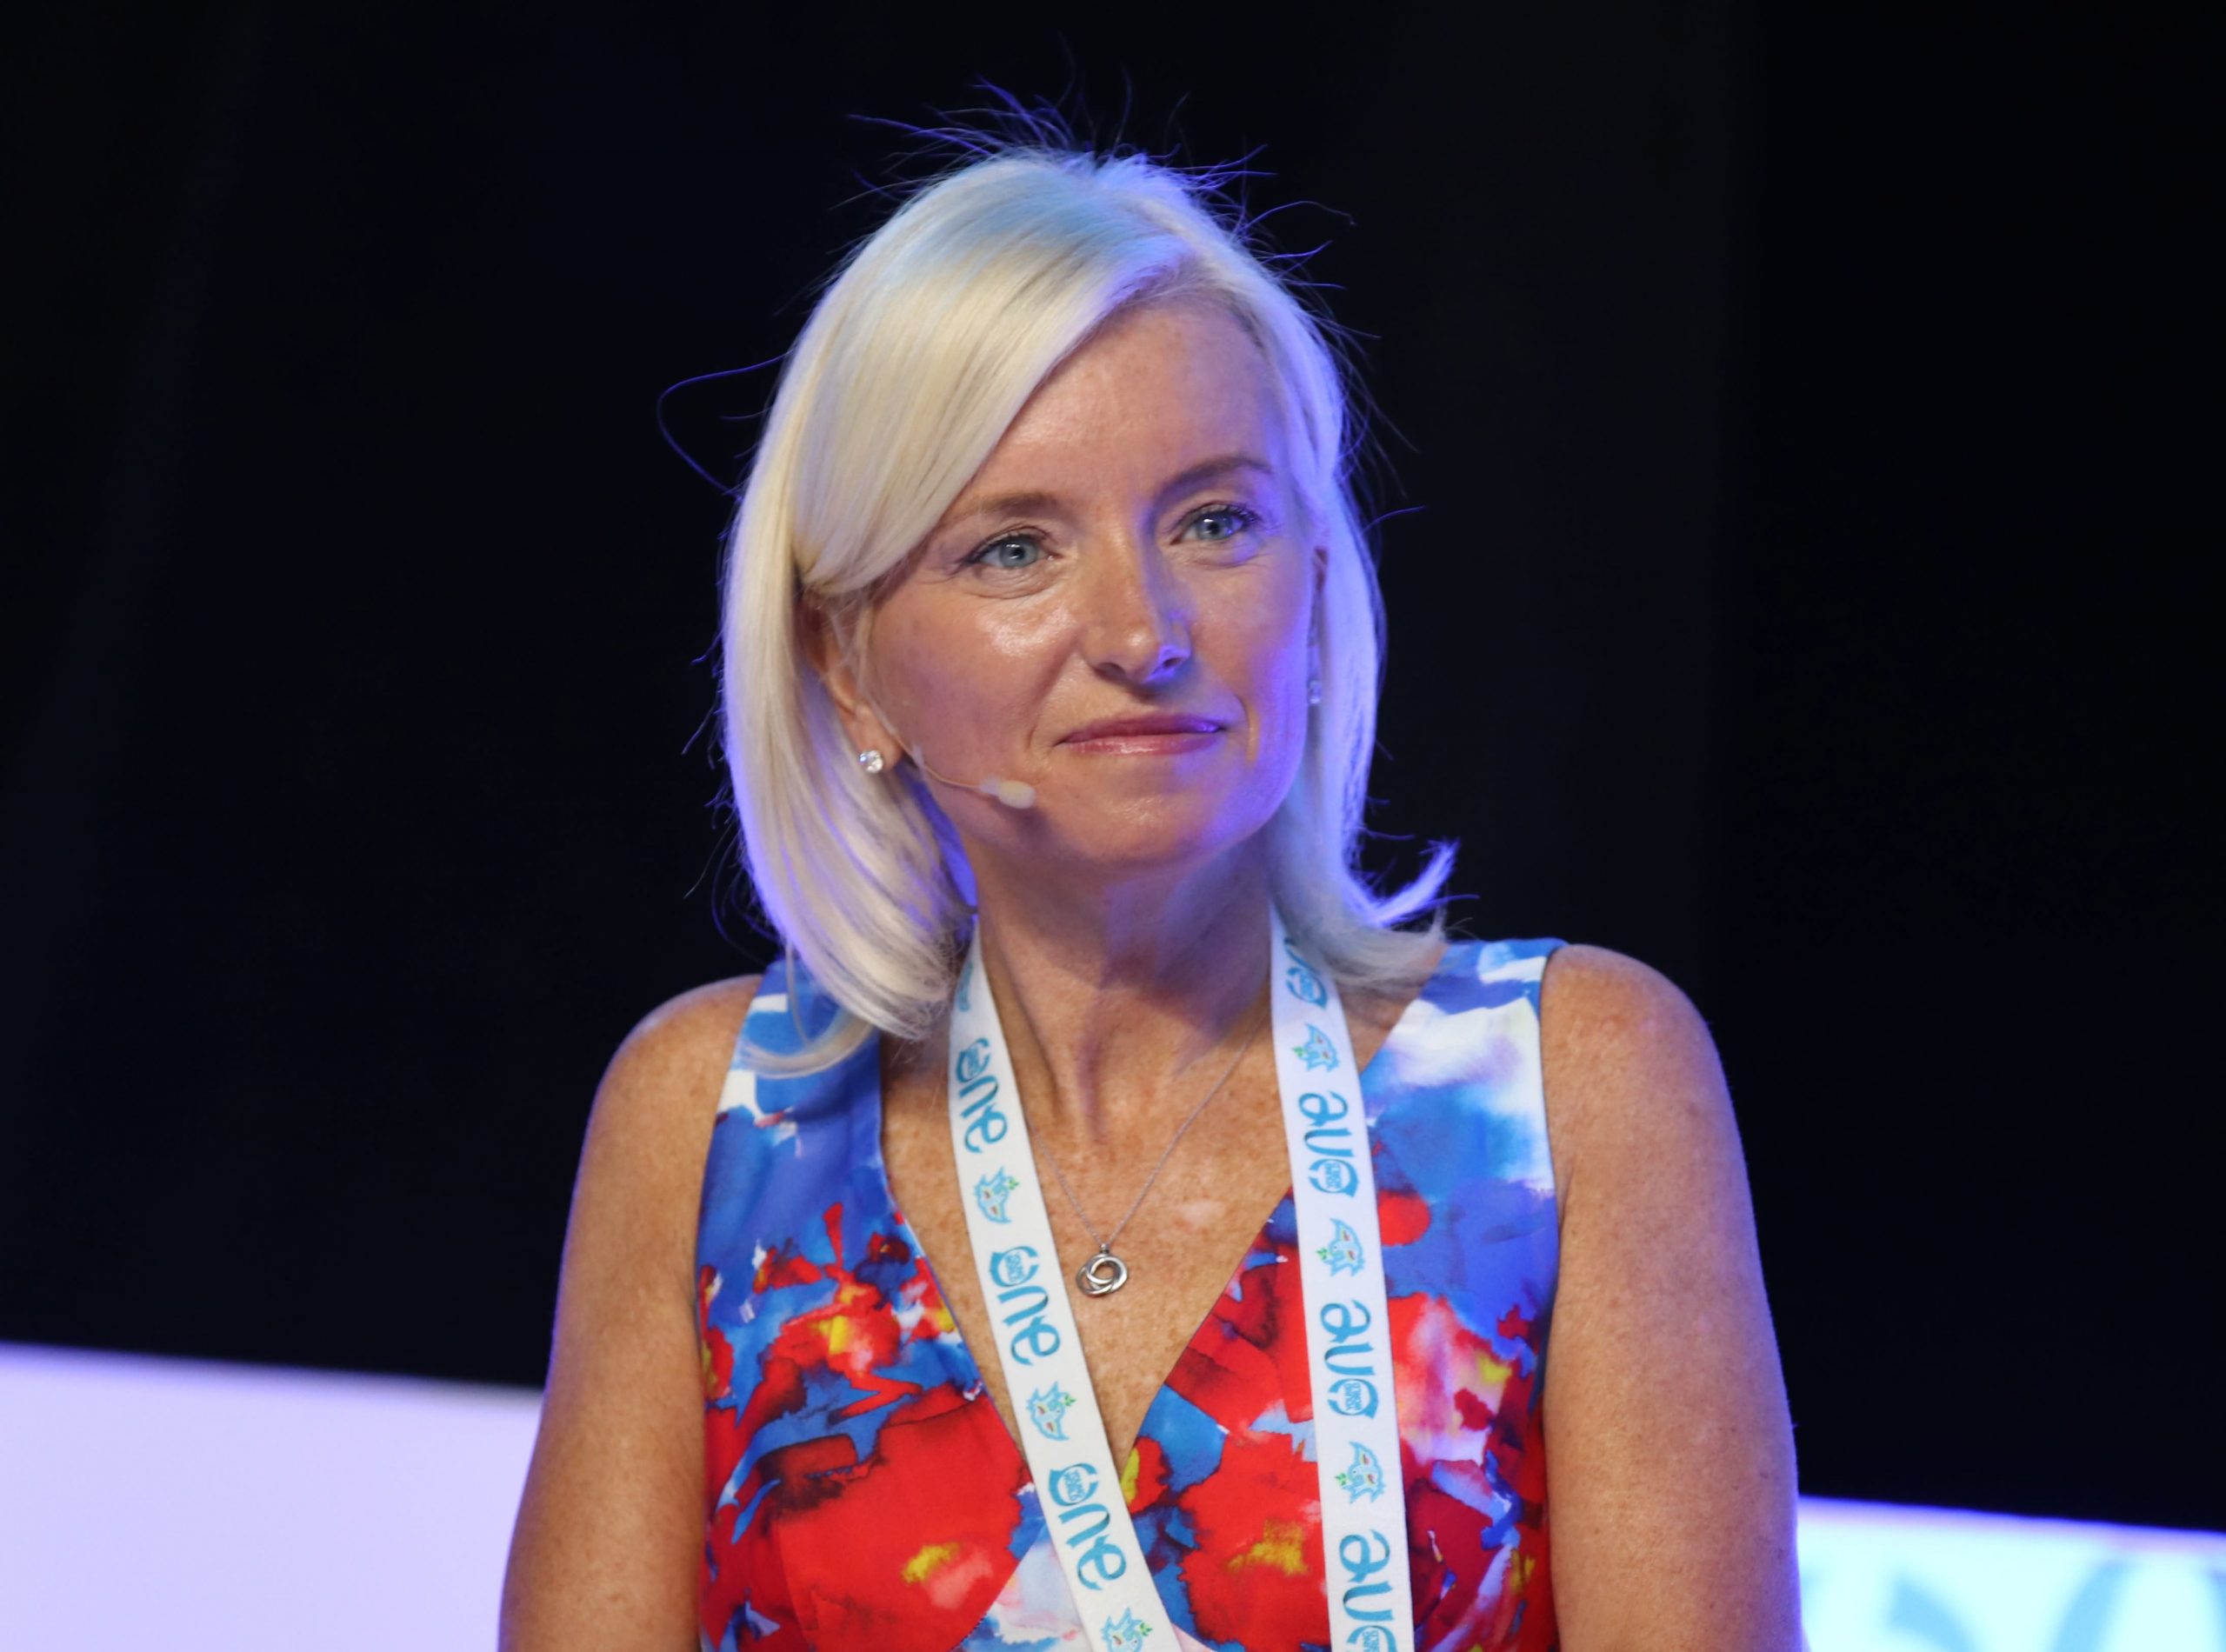 Facebook’s ad chief Carolyn Everson is leaving the company